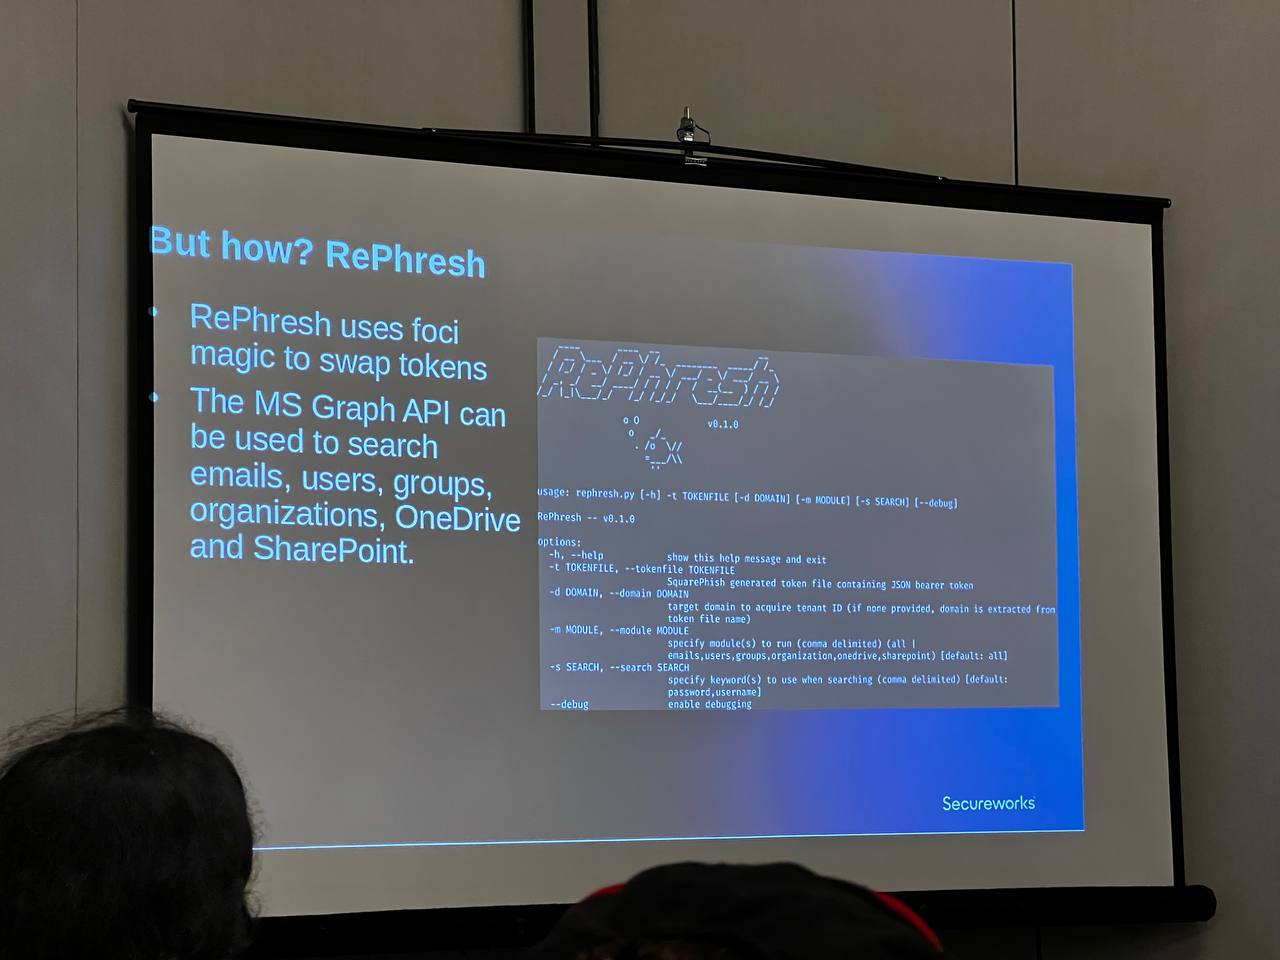 But how? Re-Phresh. It uses 'foci' magic to swap tokens. The microsoft graph api can be used to search emails, users, groups, organizations, OneDrive, and SharePoint.